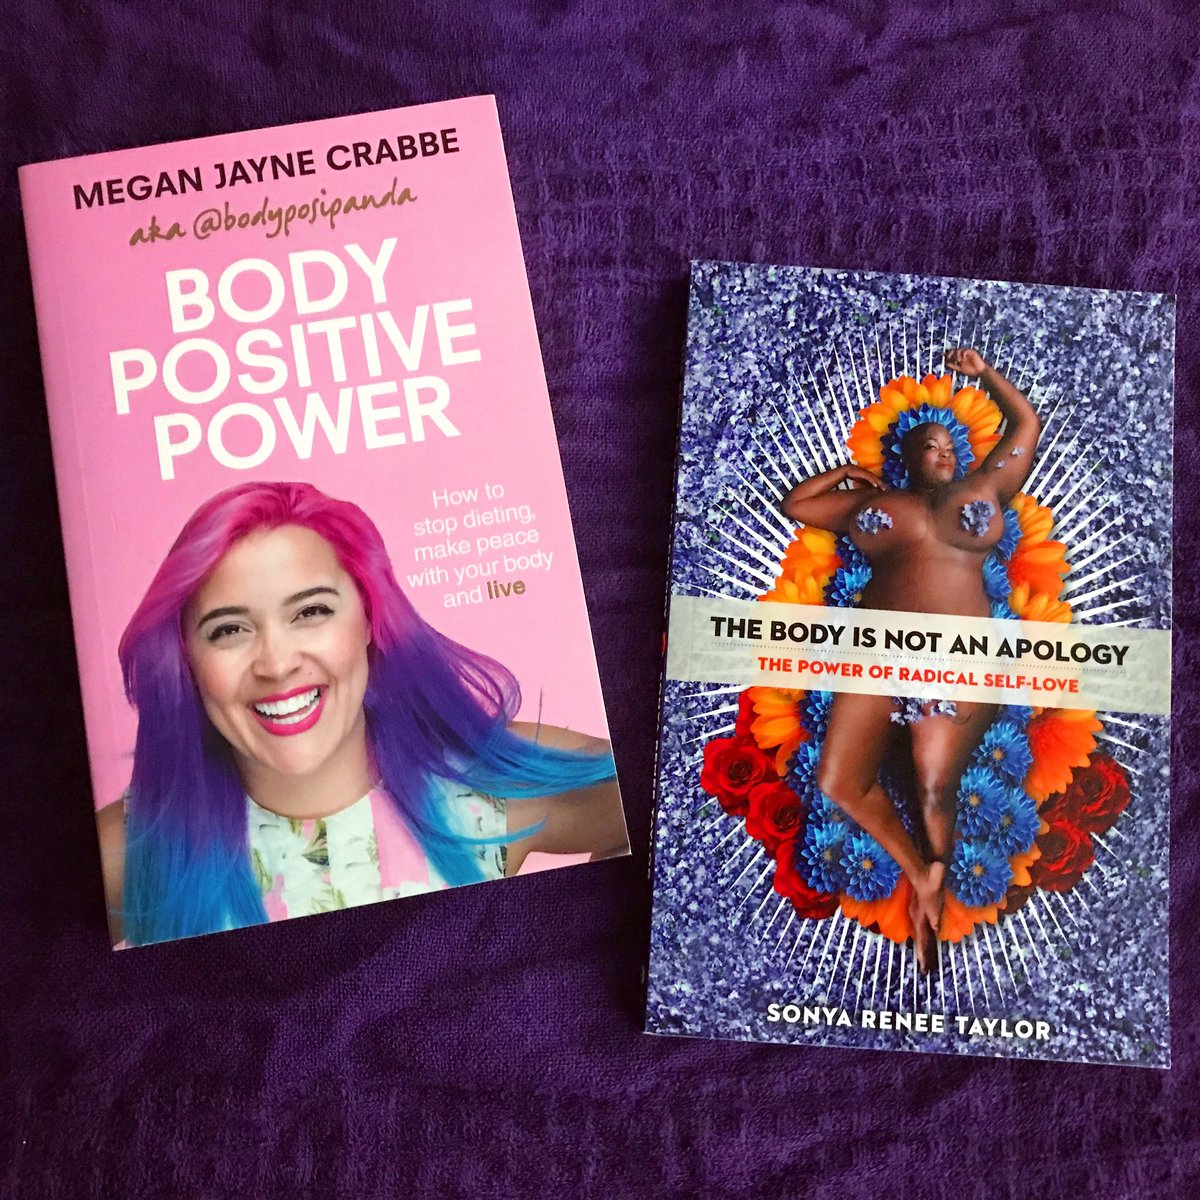  Body Positive Power, by Megan Jayne Crabbe The Body is Not an Apology, by Sonya Renee TaylorThese tackle the sexist, racist beauty standards imposed on women & how girls are taught to hate their bodies via diet culture, photoshop, social media, etc. #OurFeministLibrary